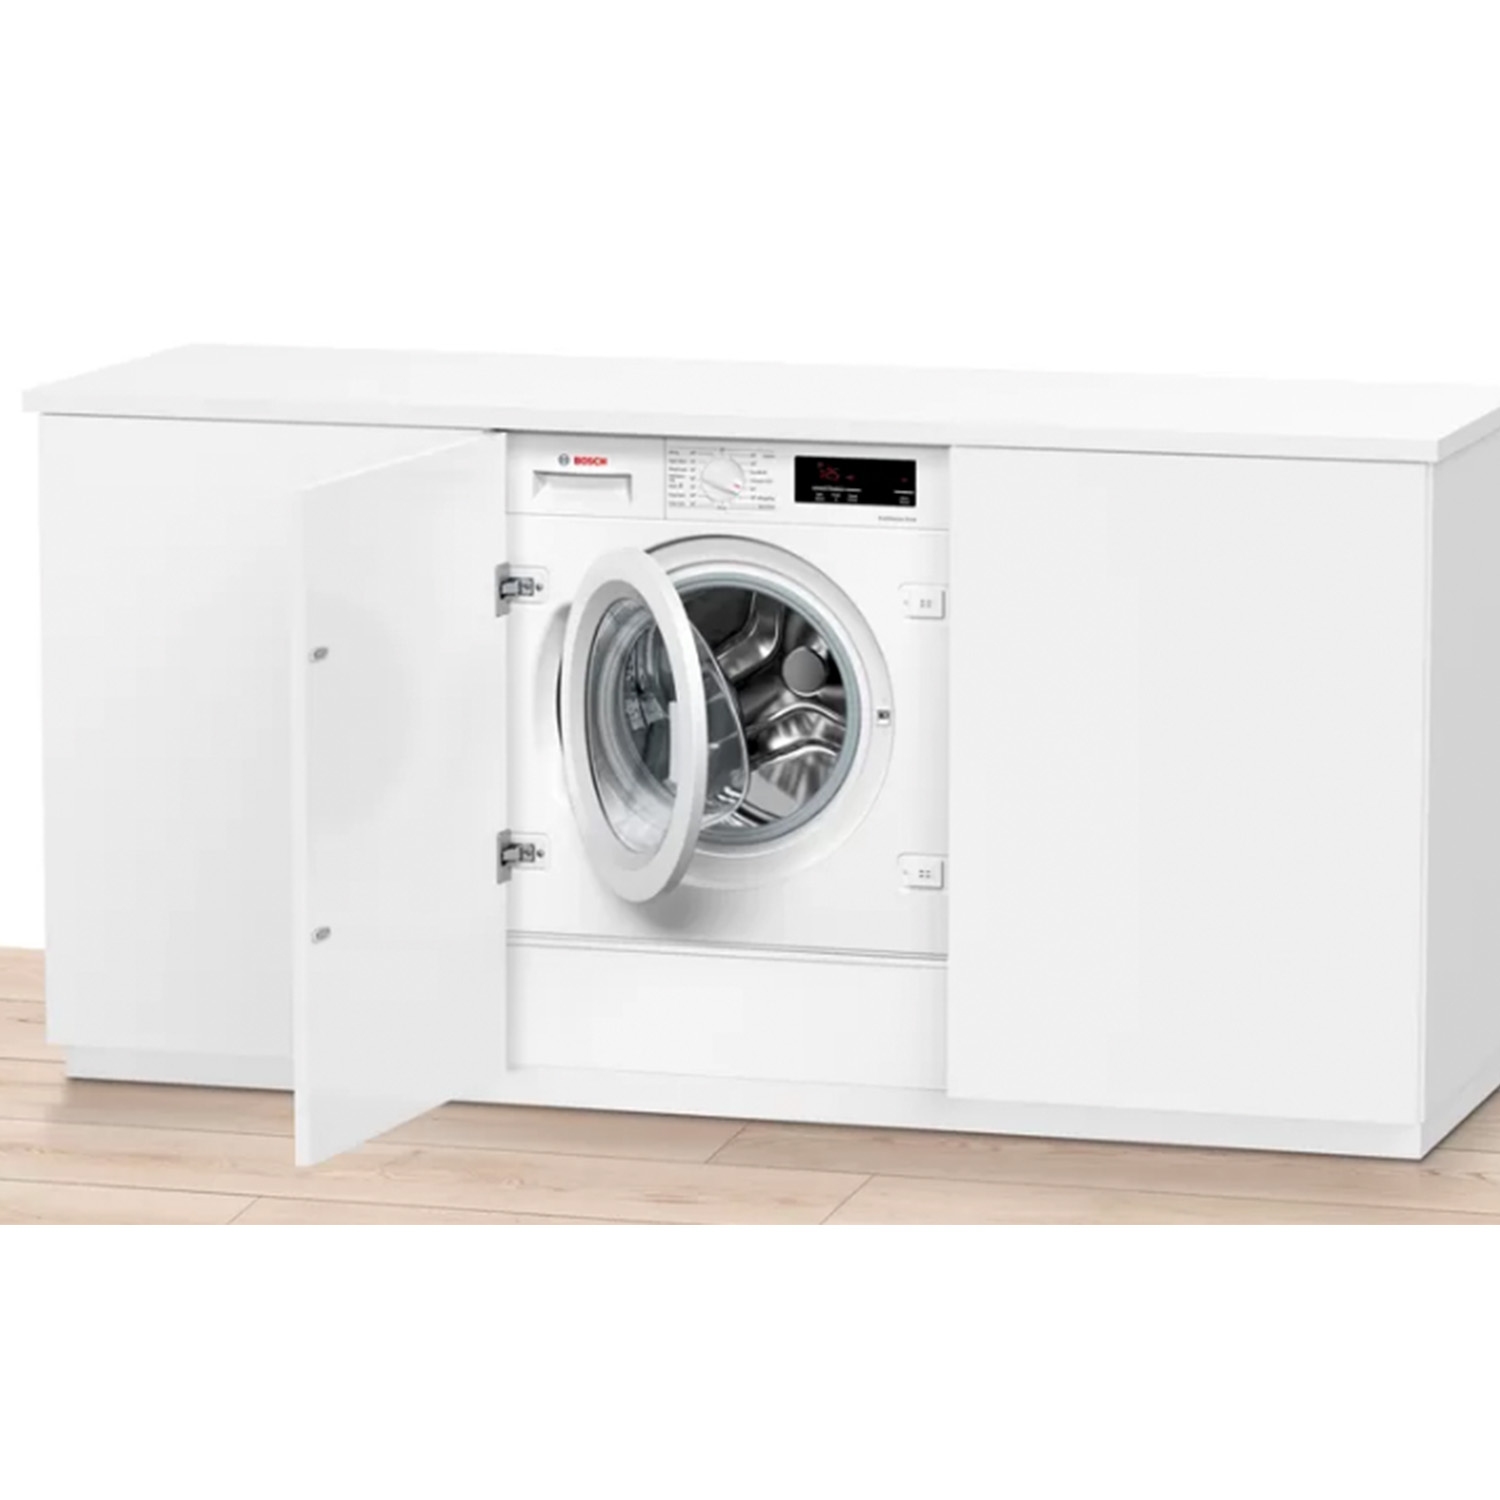 Bosch WIW28301GB Integrated 8kg 1400 Spin Washing Machine with VarioPerfect - White - 7